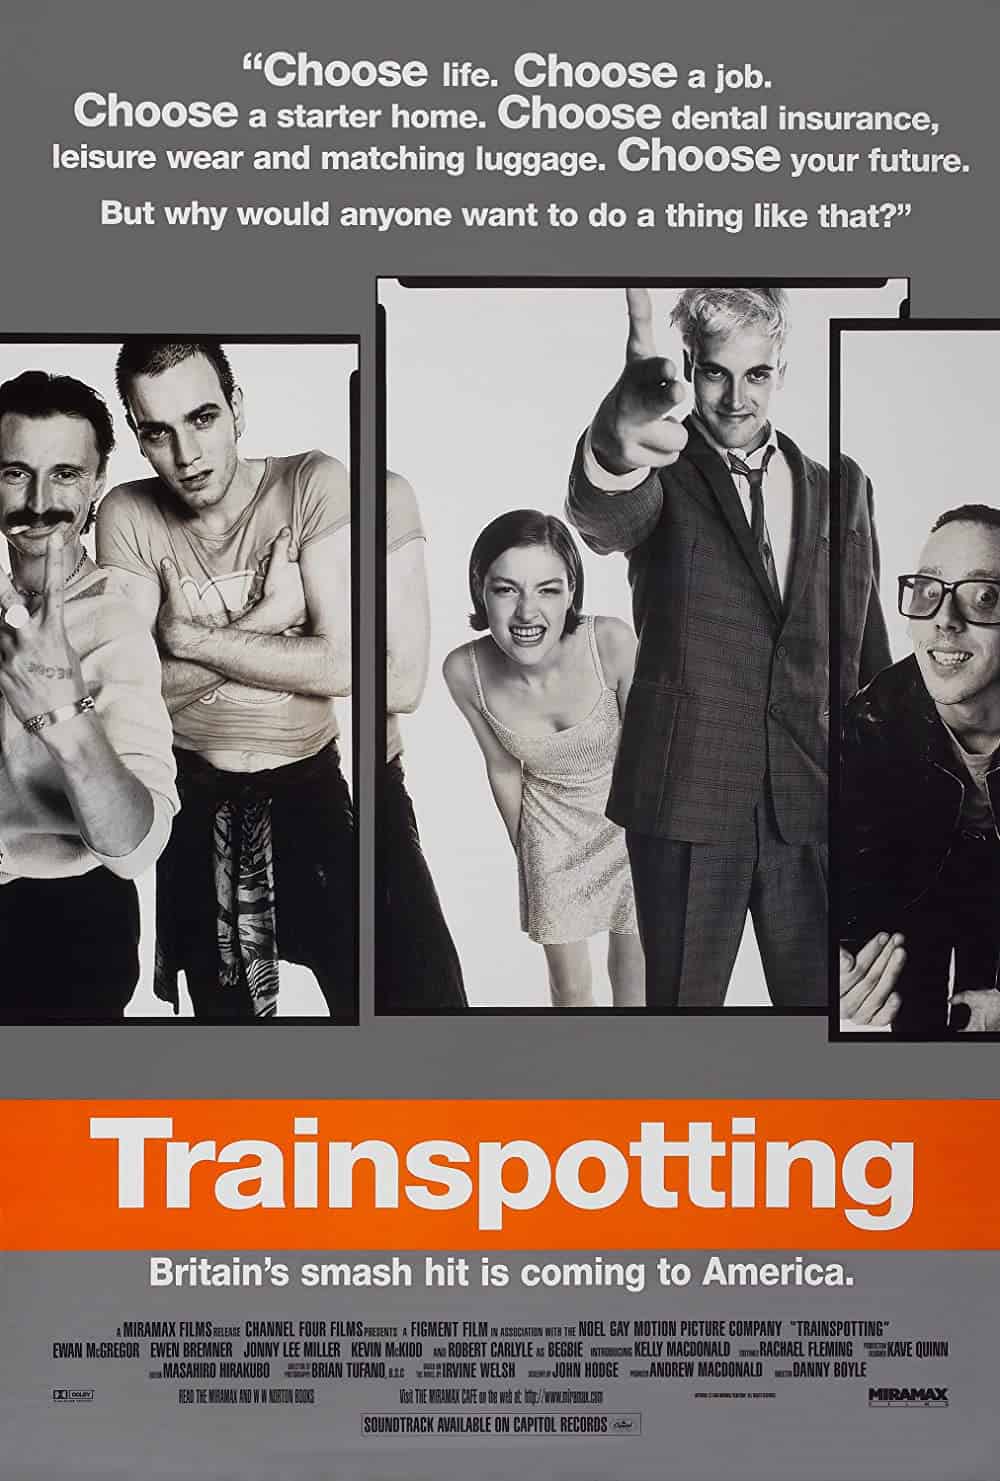 Trainspotting (1996) Best Movies about Addiction